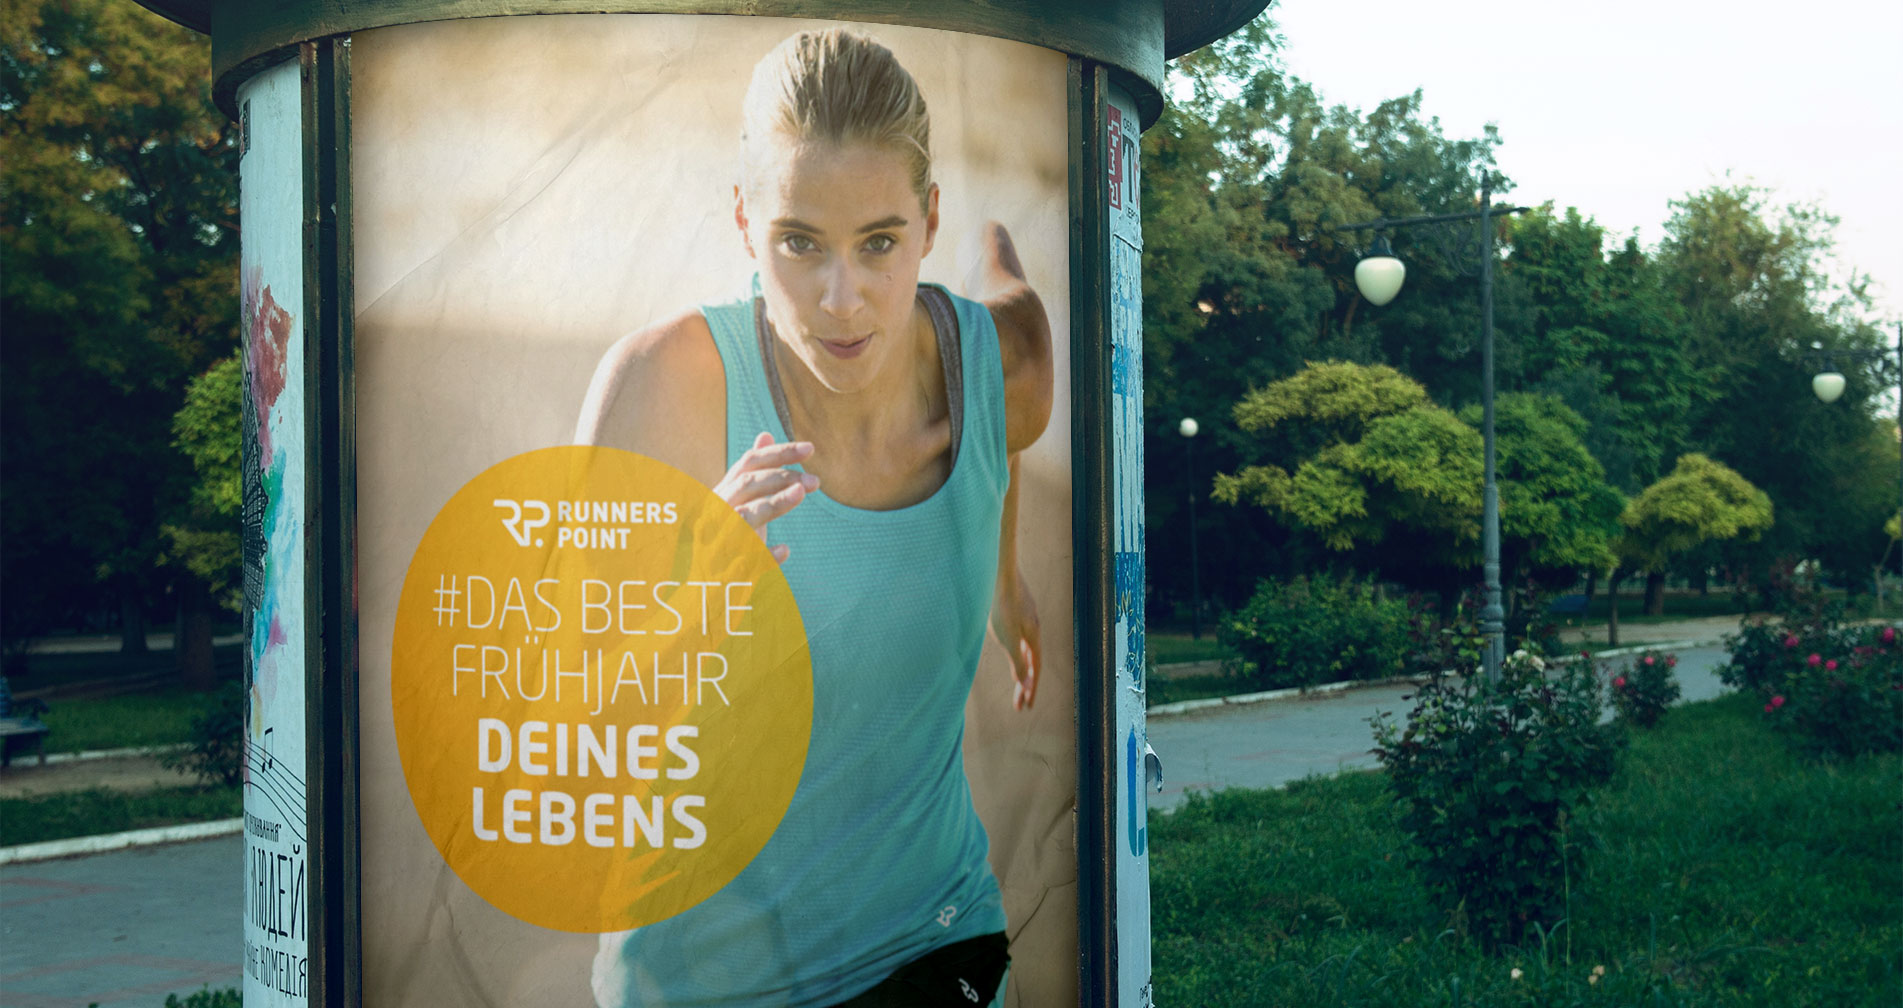 Runners Point 360° communication campaign